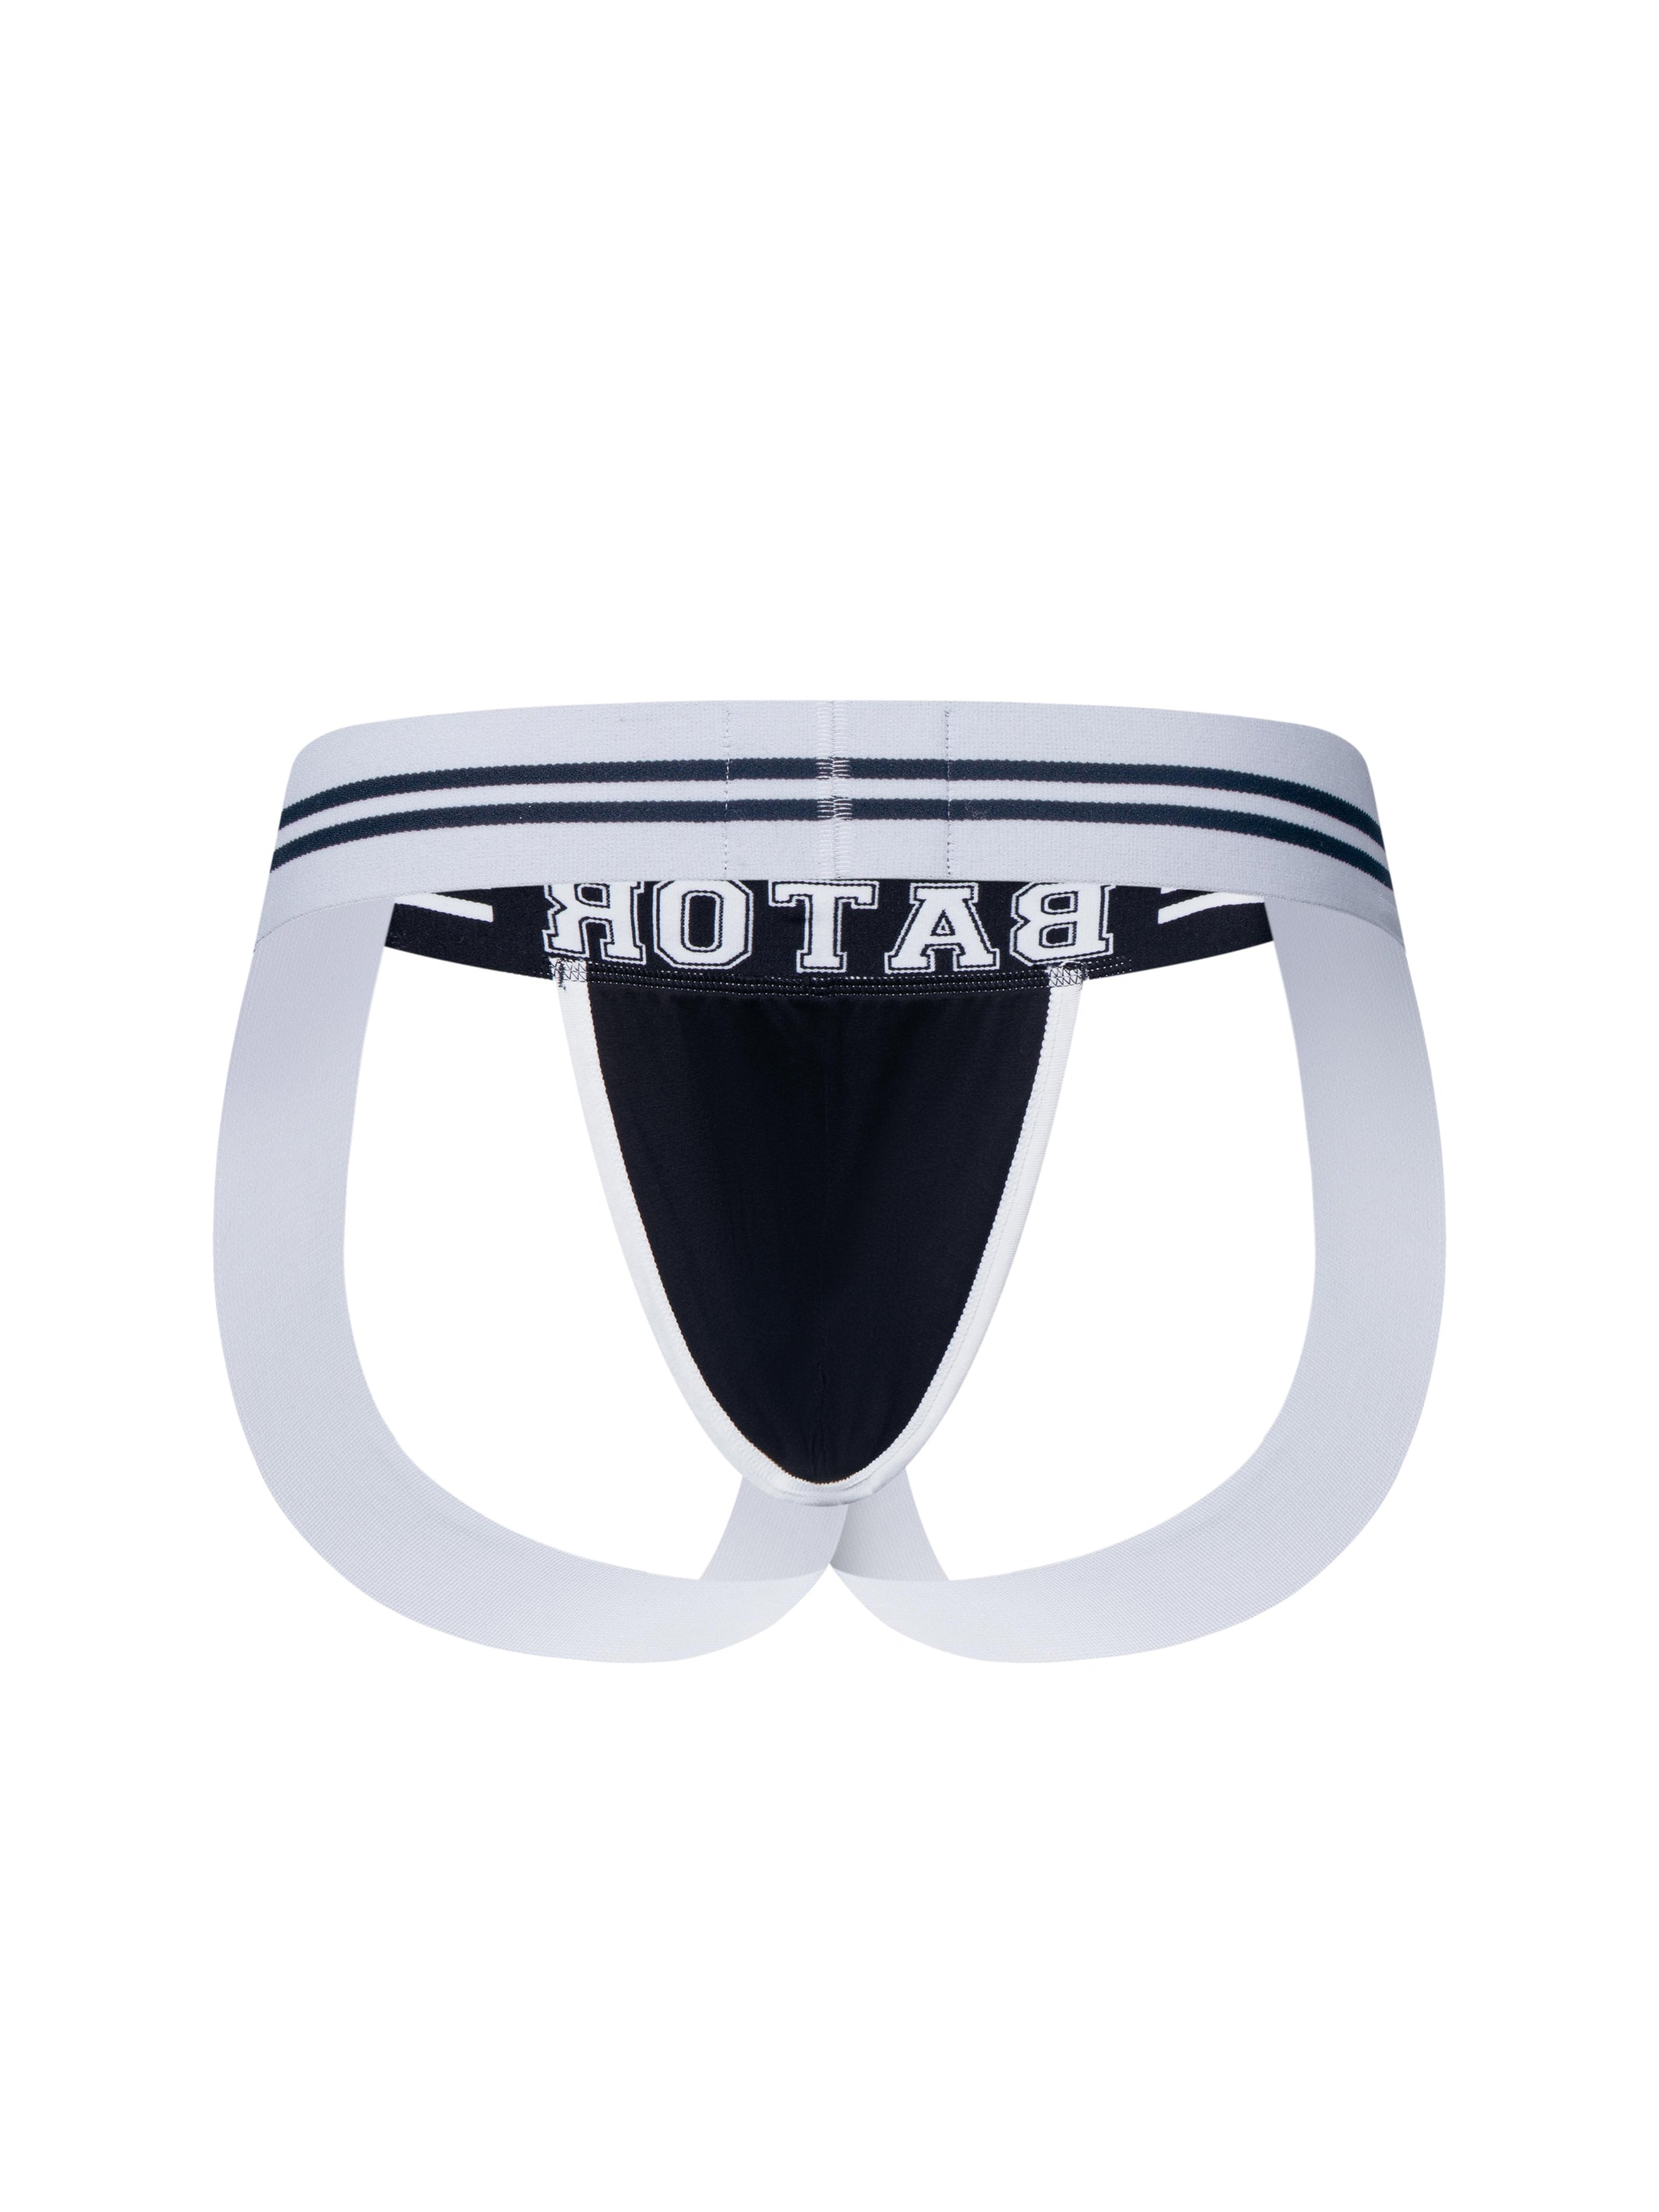 A product photo of a black Bator Jock taken from behind.